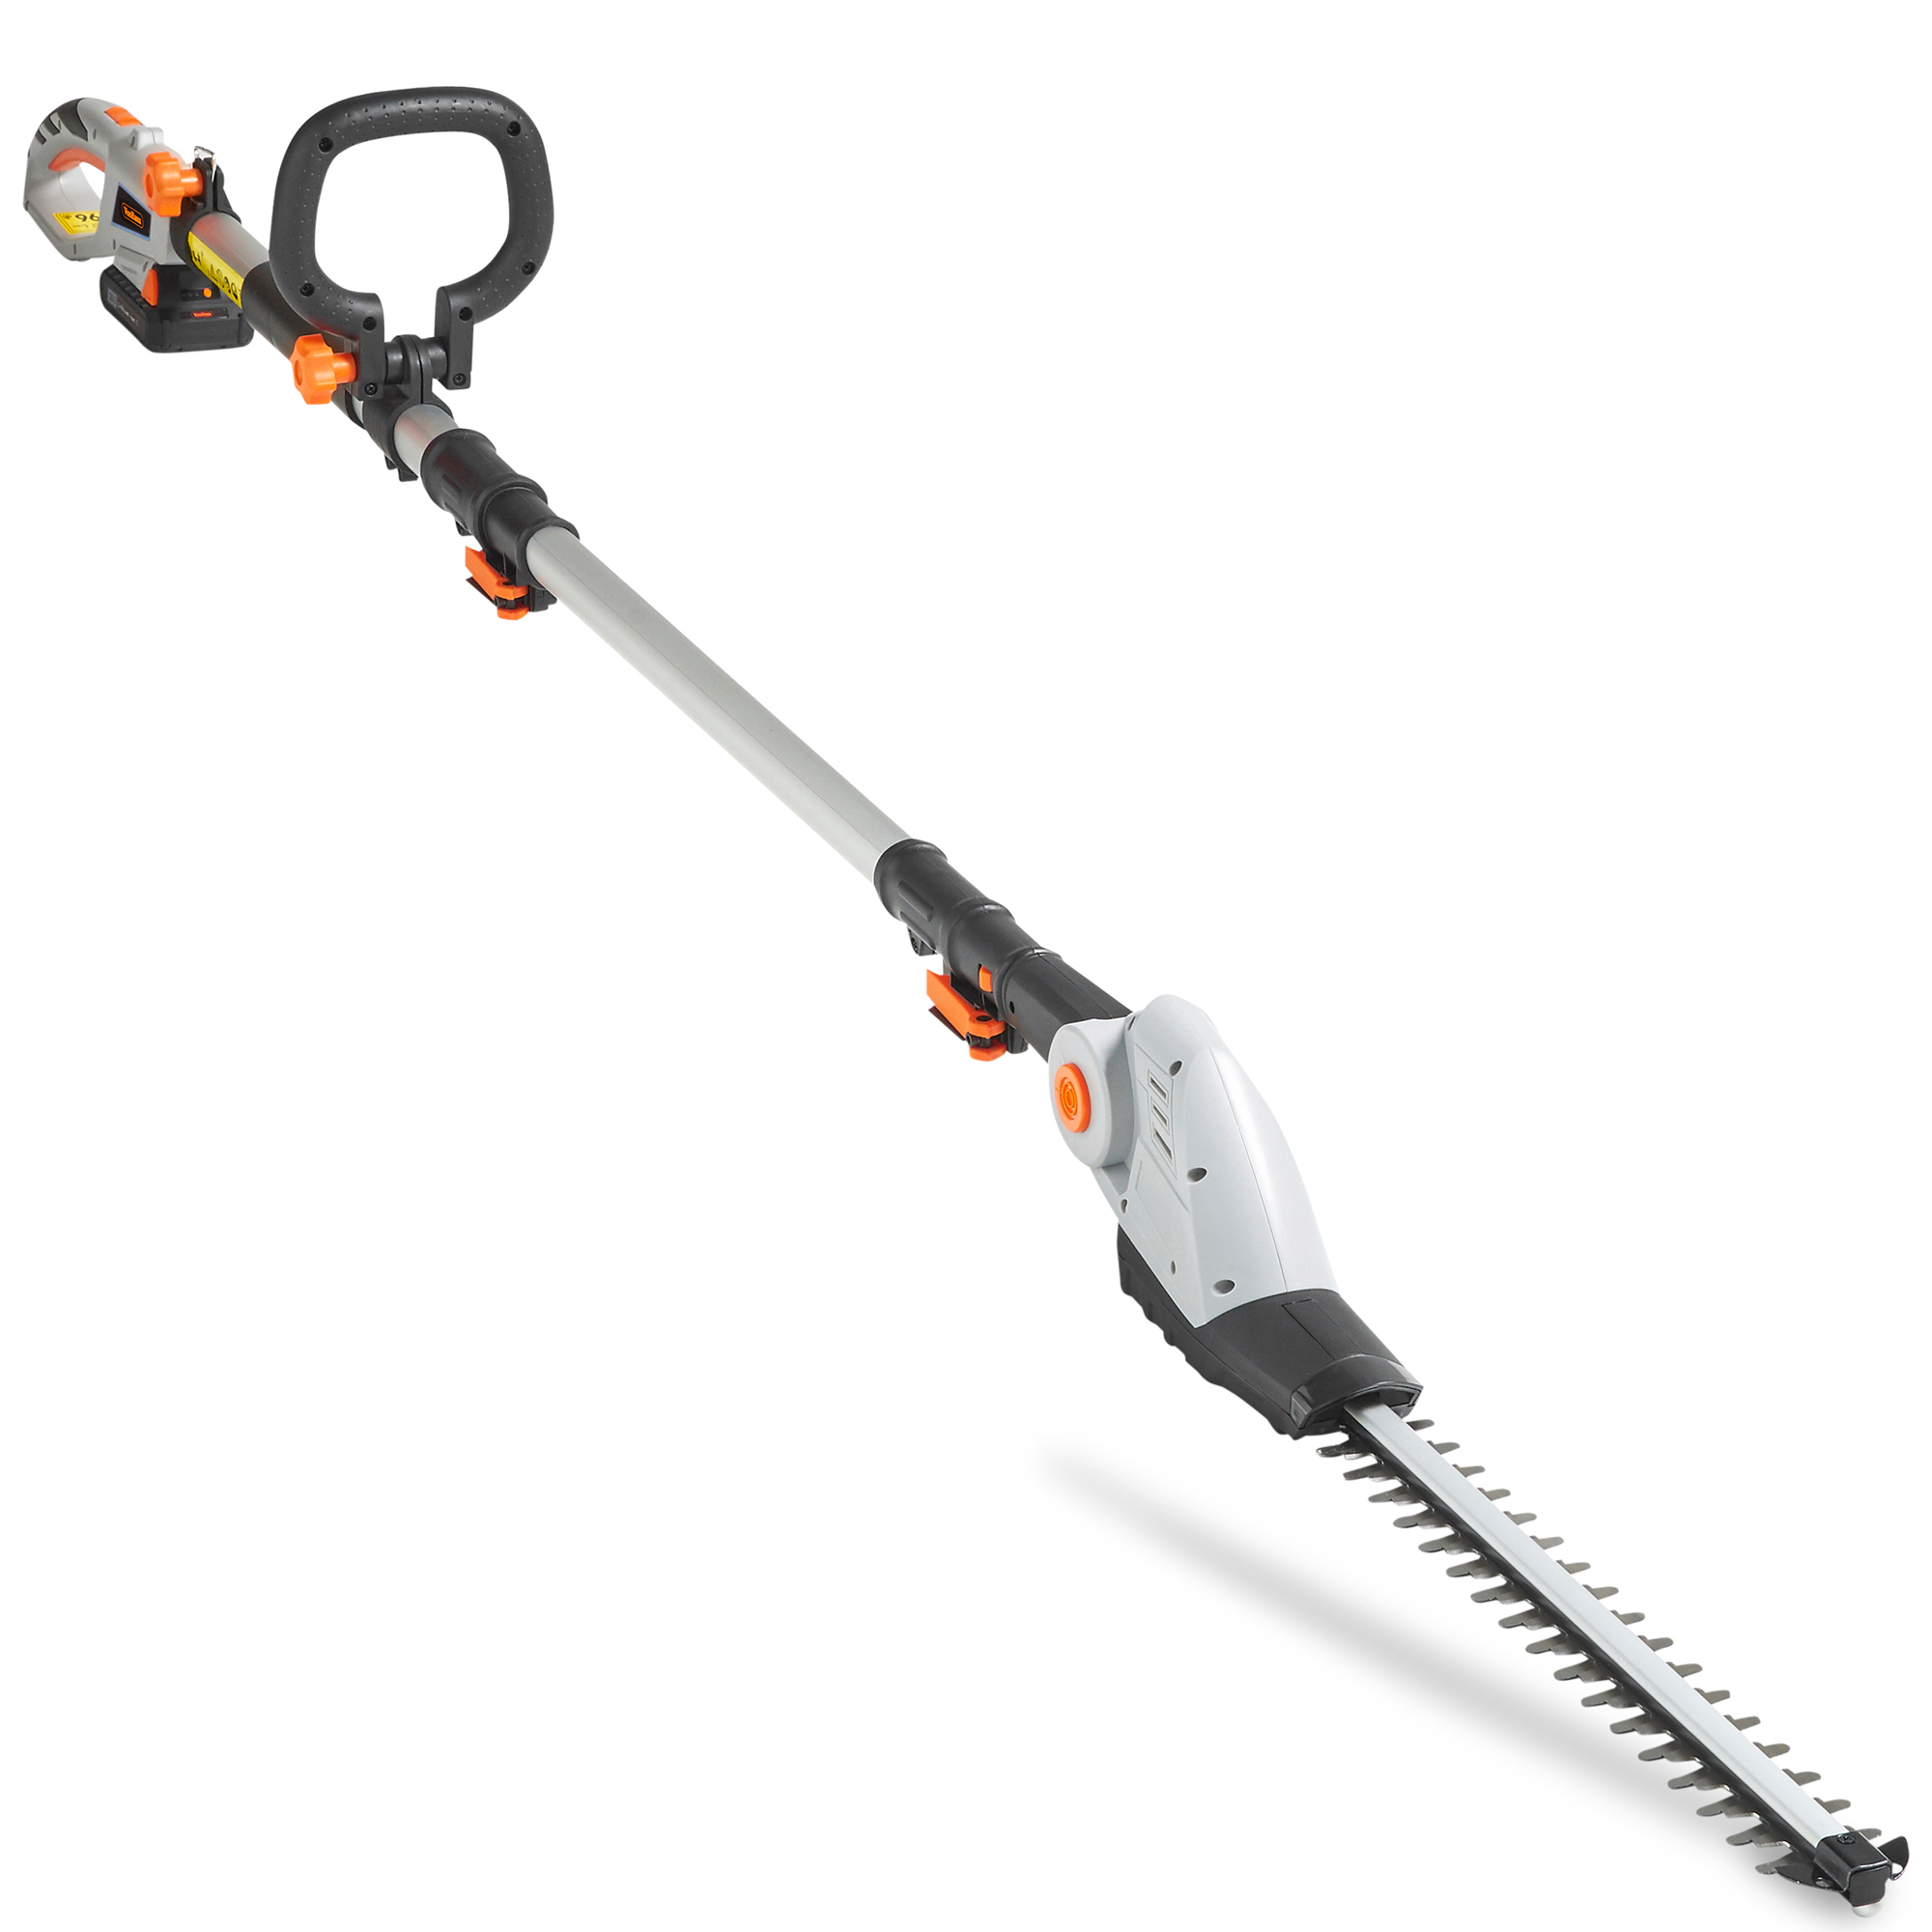 VonHaus Cordless Pole Hedge Trimmer Cutter 20V Telescopic with Extendable Reach